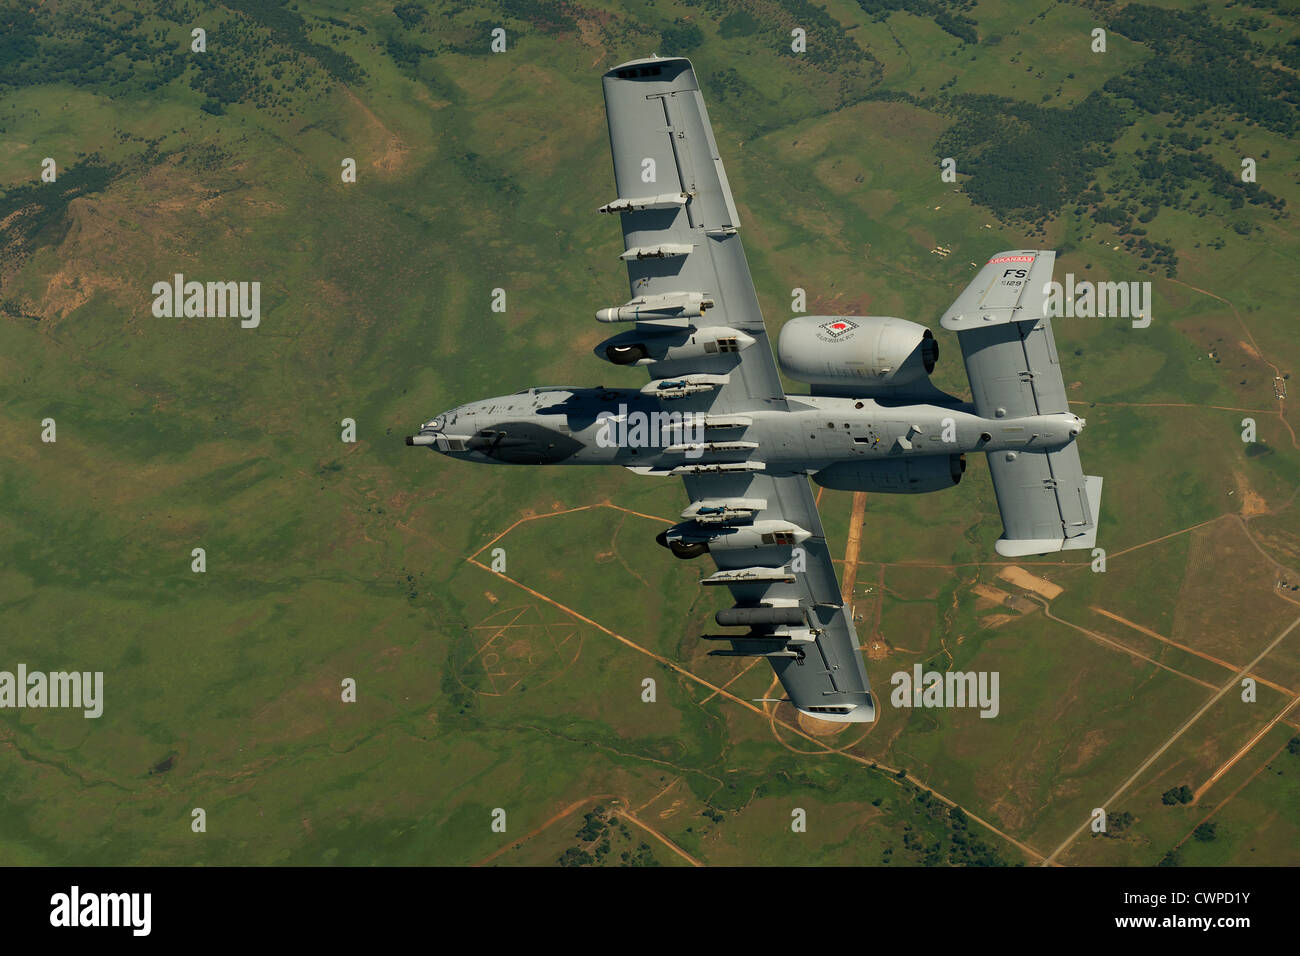 An A-10 Thunderbolt II banks into a high angle firing position during a training exercise June 4, 2012 on Razorback Range located at Fort Chaffee, Arkansas maneuver training centered forward control. Stock Photo